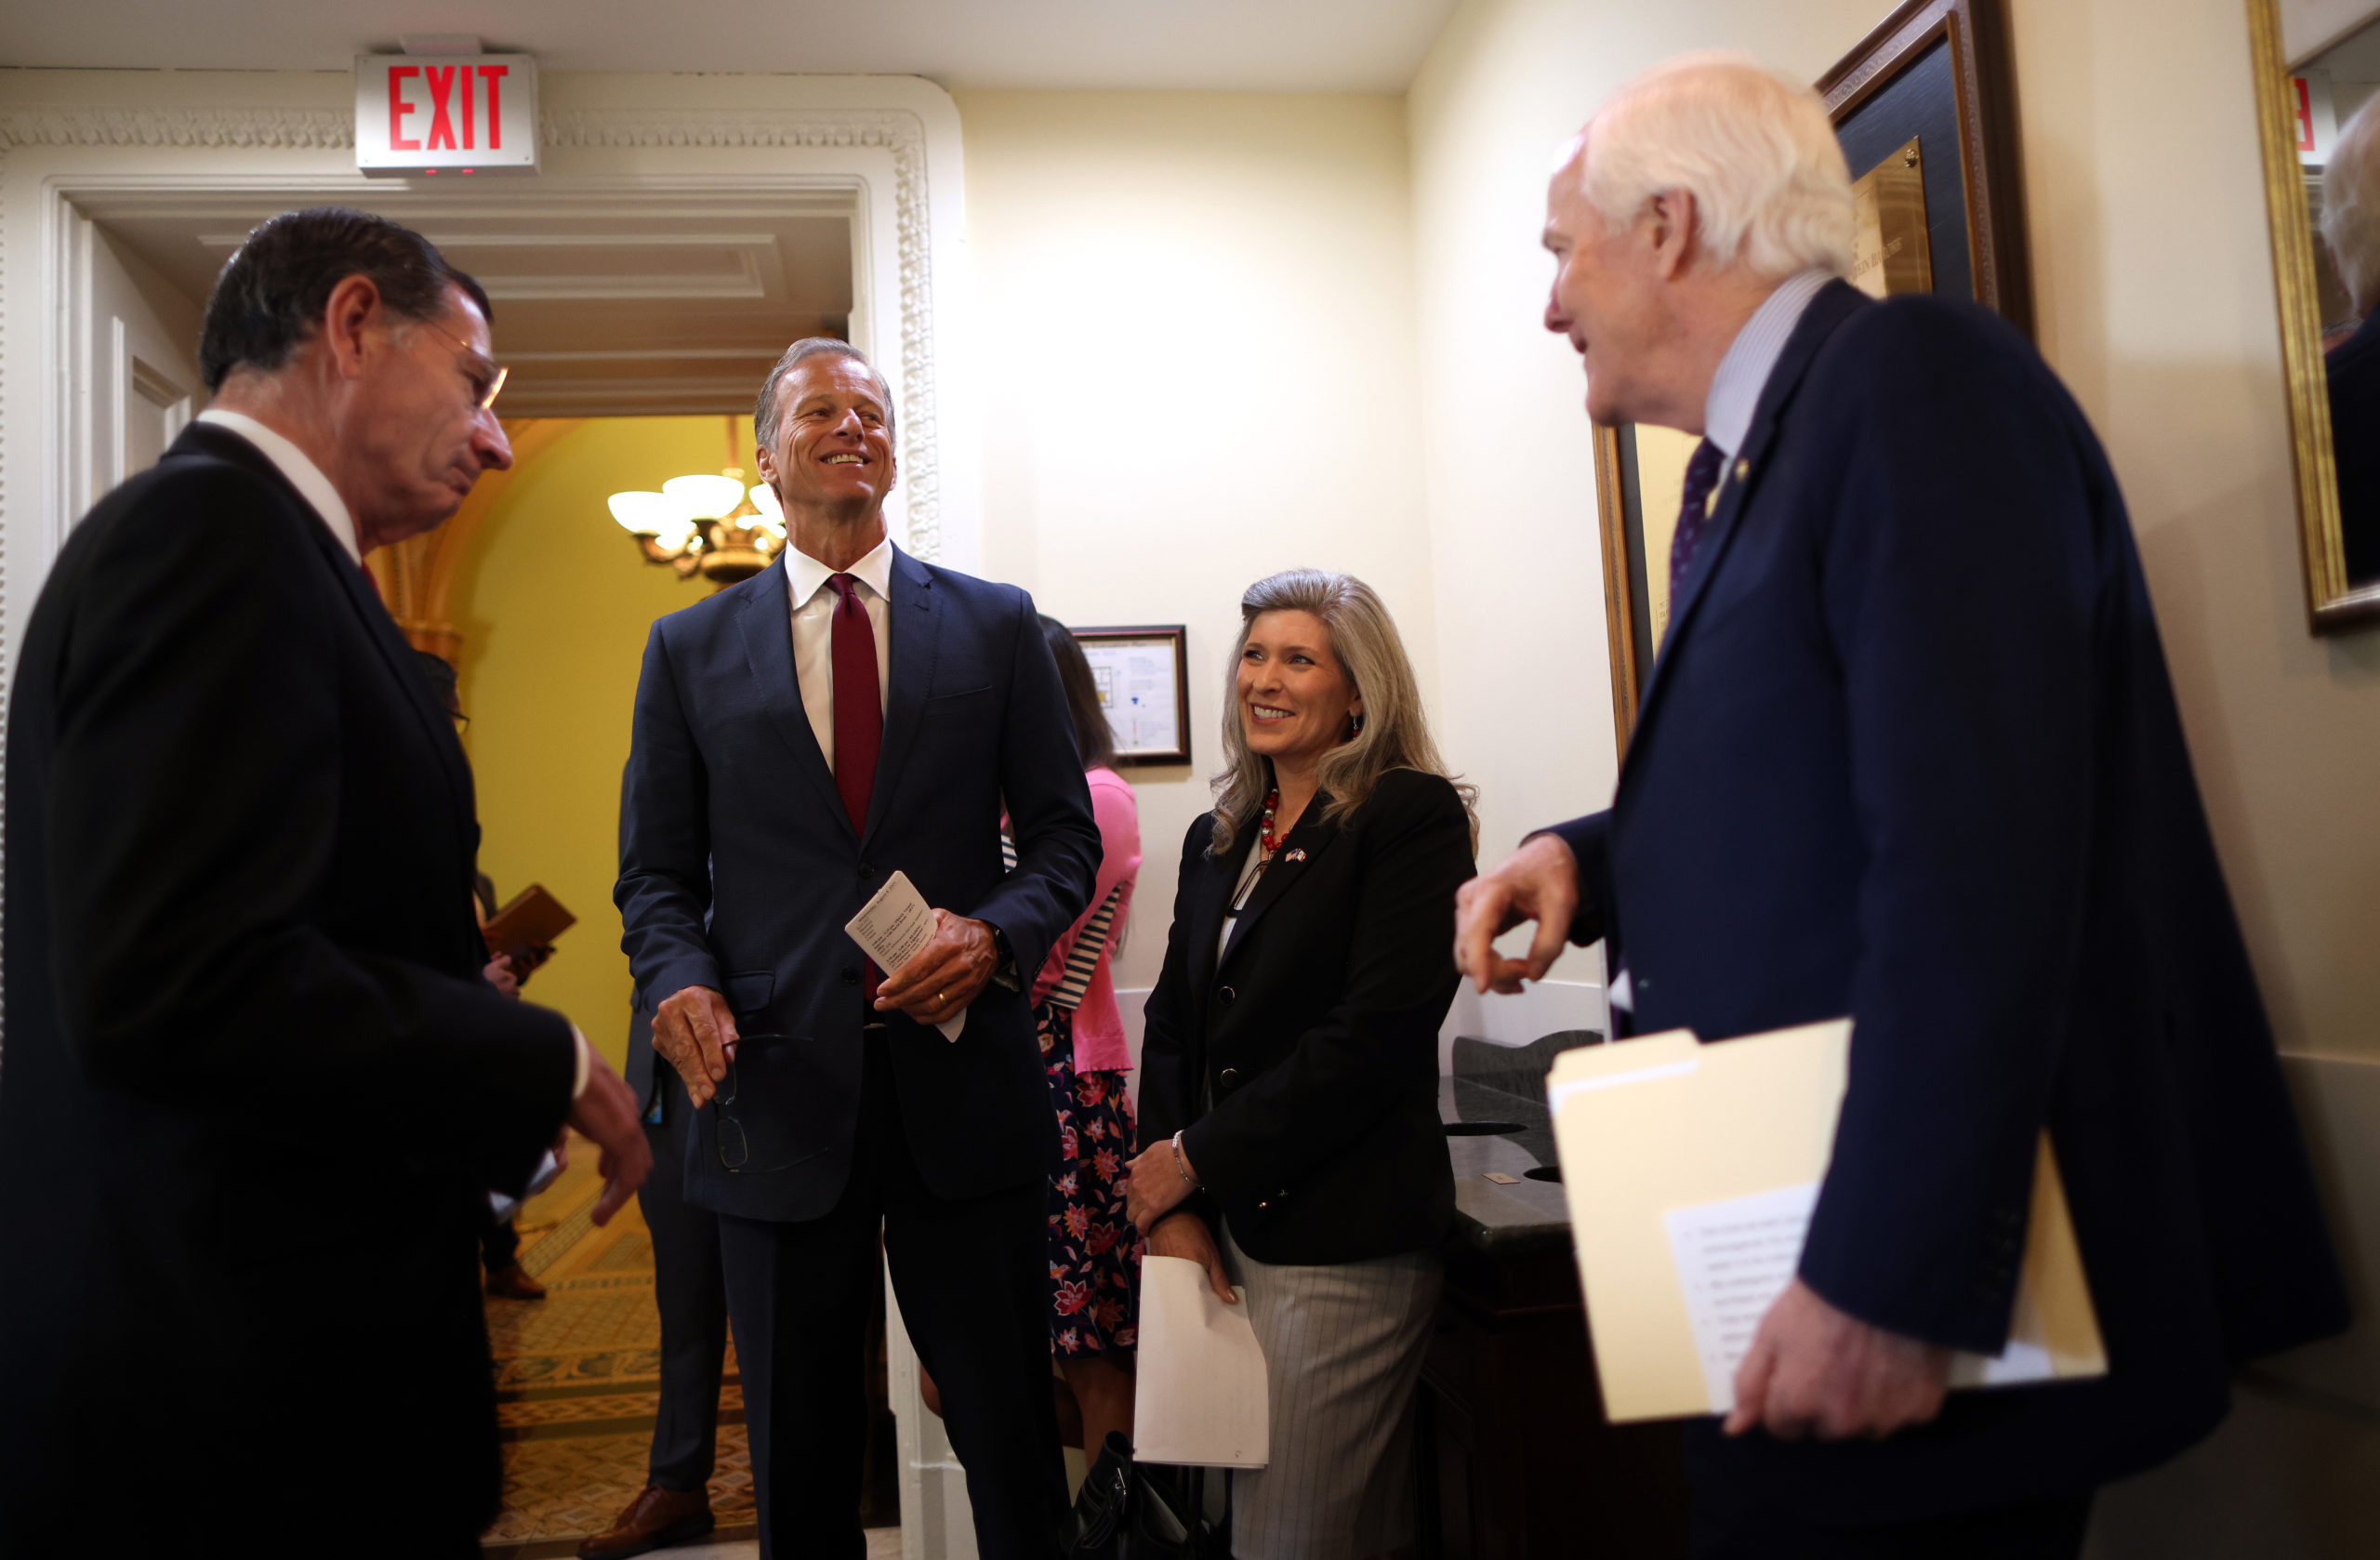 WASHINGTON, DC - AUGUST 04: (L-R) Sen. John Barasso (R-WY), Sen. John Thune (R-SD), Sen. Marsha Blackburn (R-TN) and Sen. John Cornyn (R-TX) talk prior to a press conference on a proposed Democratic tax plan, at the U.S. Capitol on August 04, 2021 in Washington, DC. The Senators spoke out on the tax proposal saying that it will hurt job growth and the middle class. (Photo by Kevin Dietsch/Getty Images)